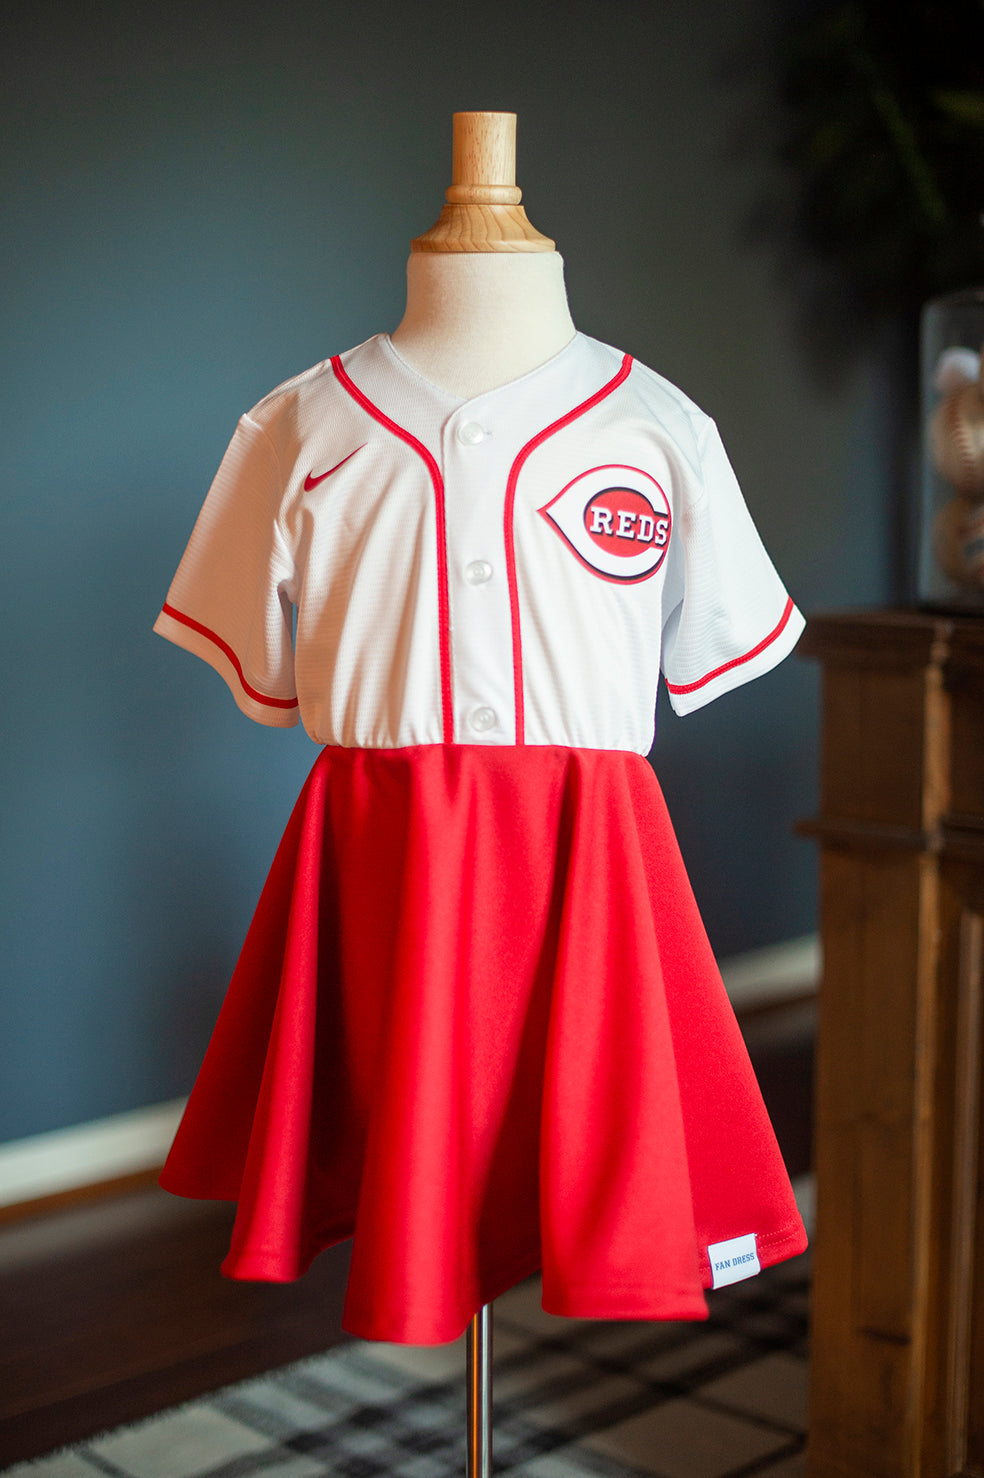 reds baby jersey